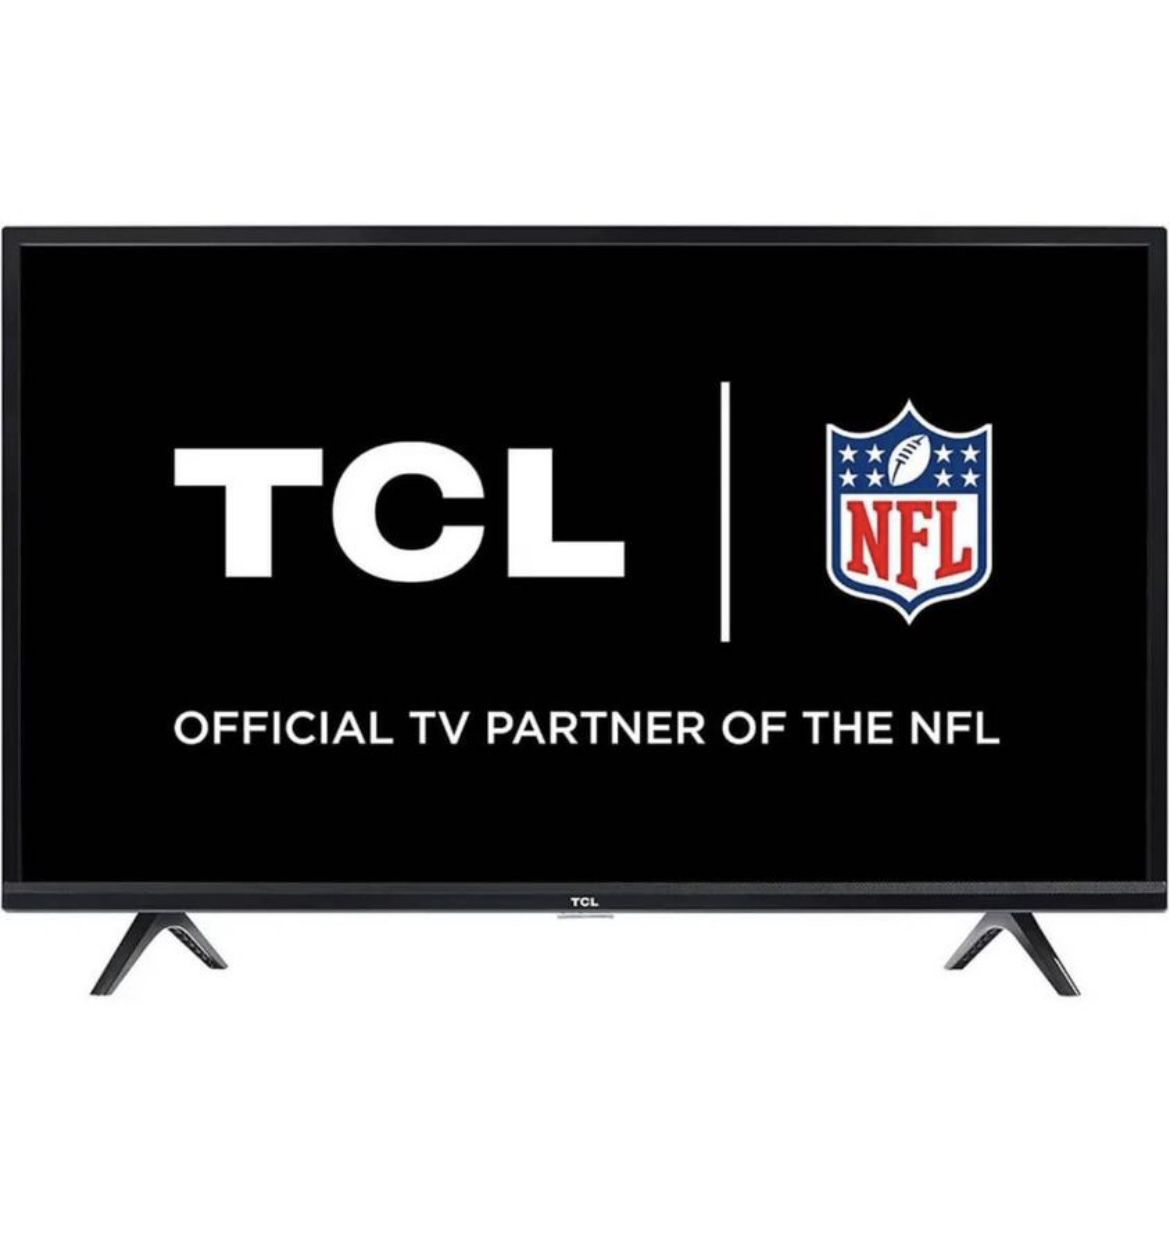 TCL 32S334 32-inch Class 3-Series Full HD LED Smart Android TV w/ Remote